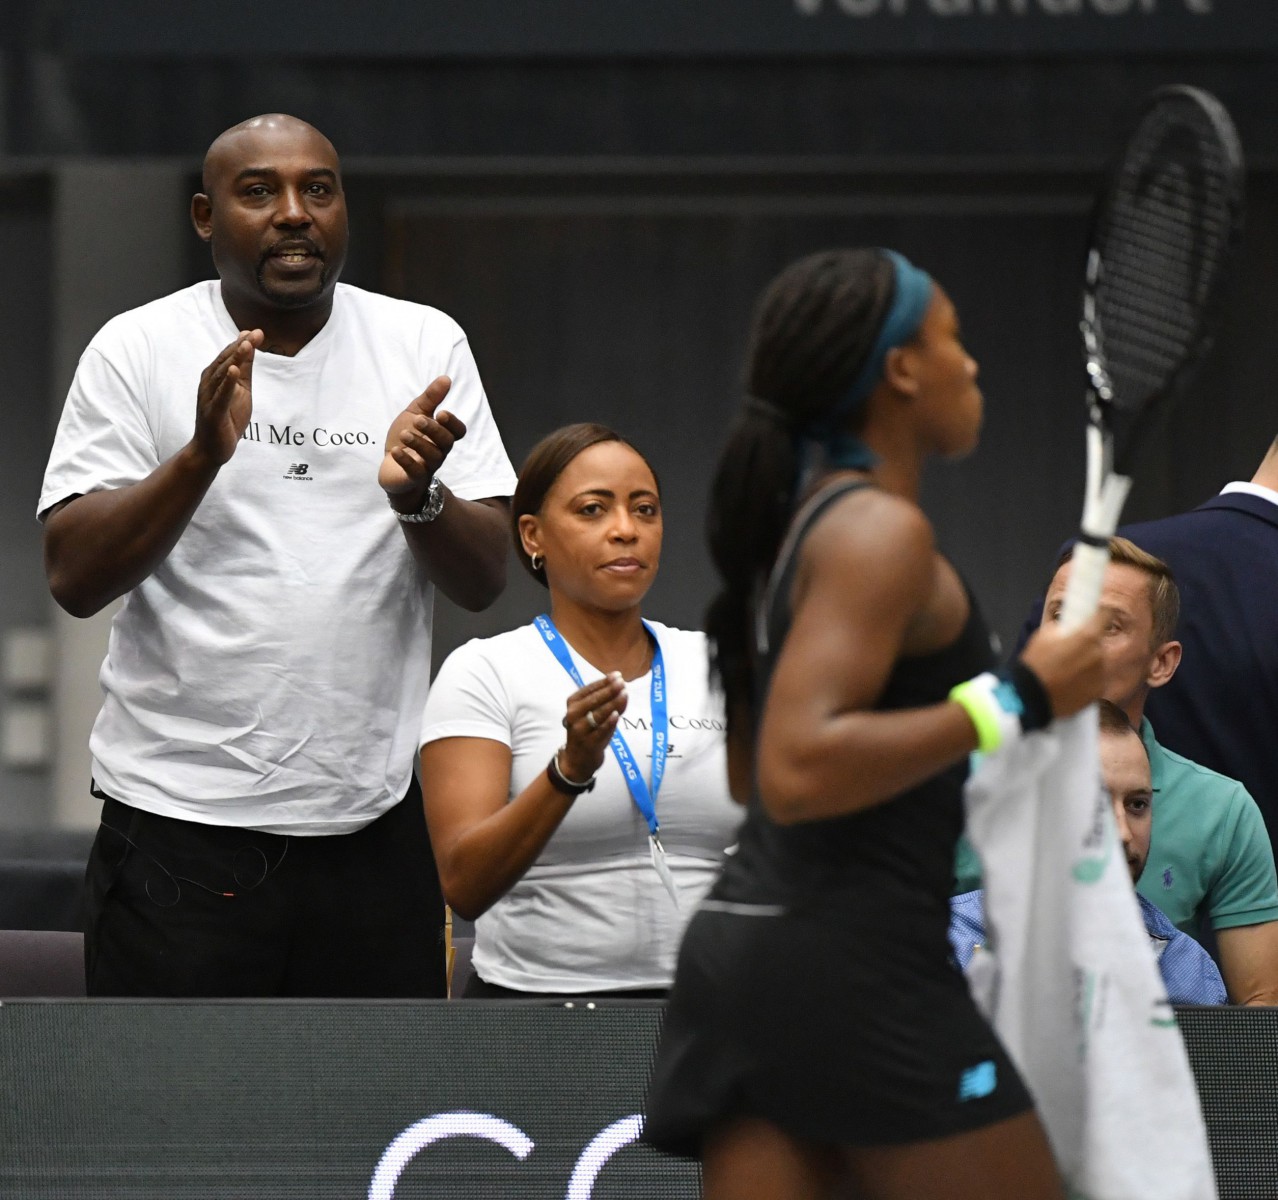 Parents Corey and Candi were court-side to cheer their daughter on to her first singles title